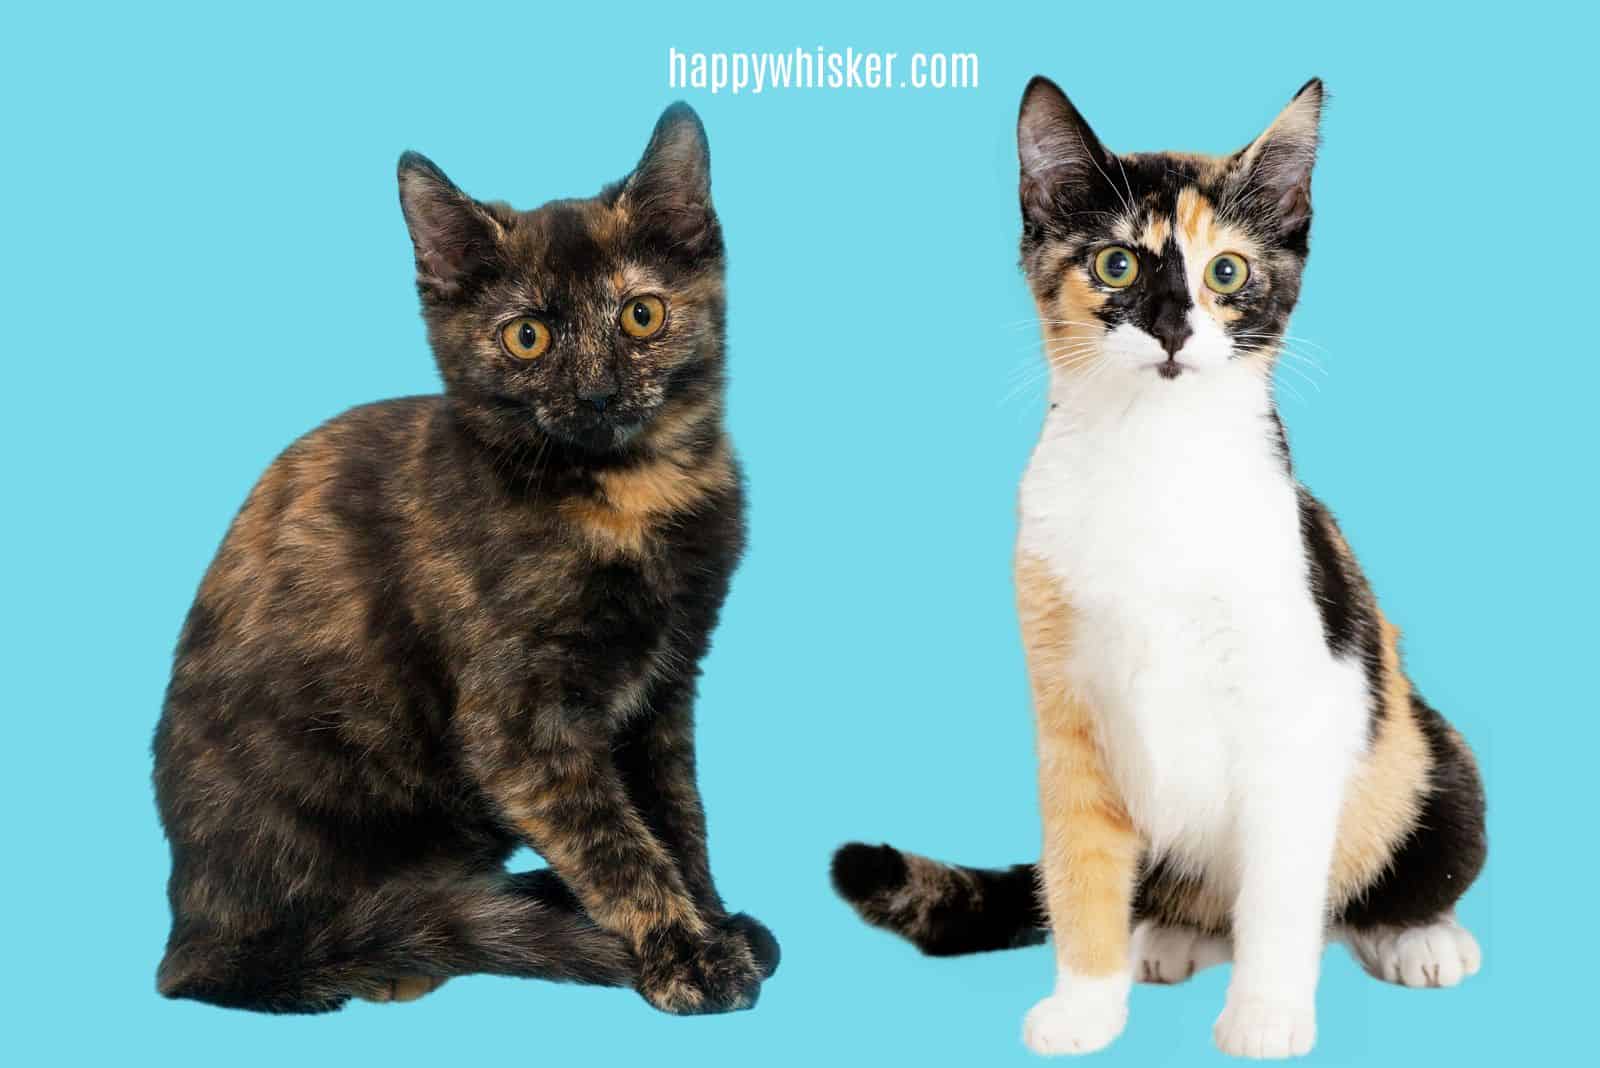 Tortoiseshell and Calico Cat are sitting and looking at the camera